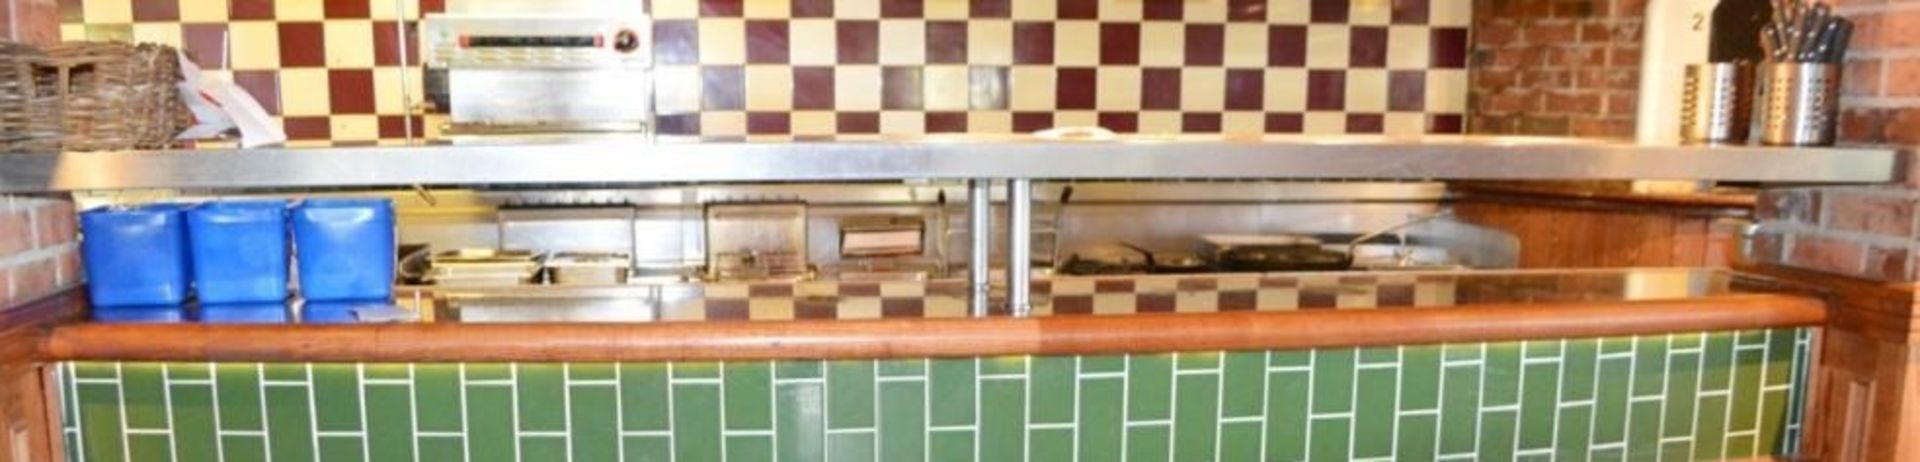 1 x Commercial Kitchen Restaurant Stainless Steel Heated Gantry - W287 - CL357 - Ref FB178 - - Image 2 of 4